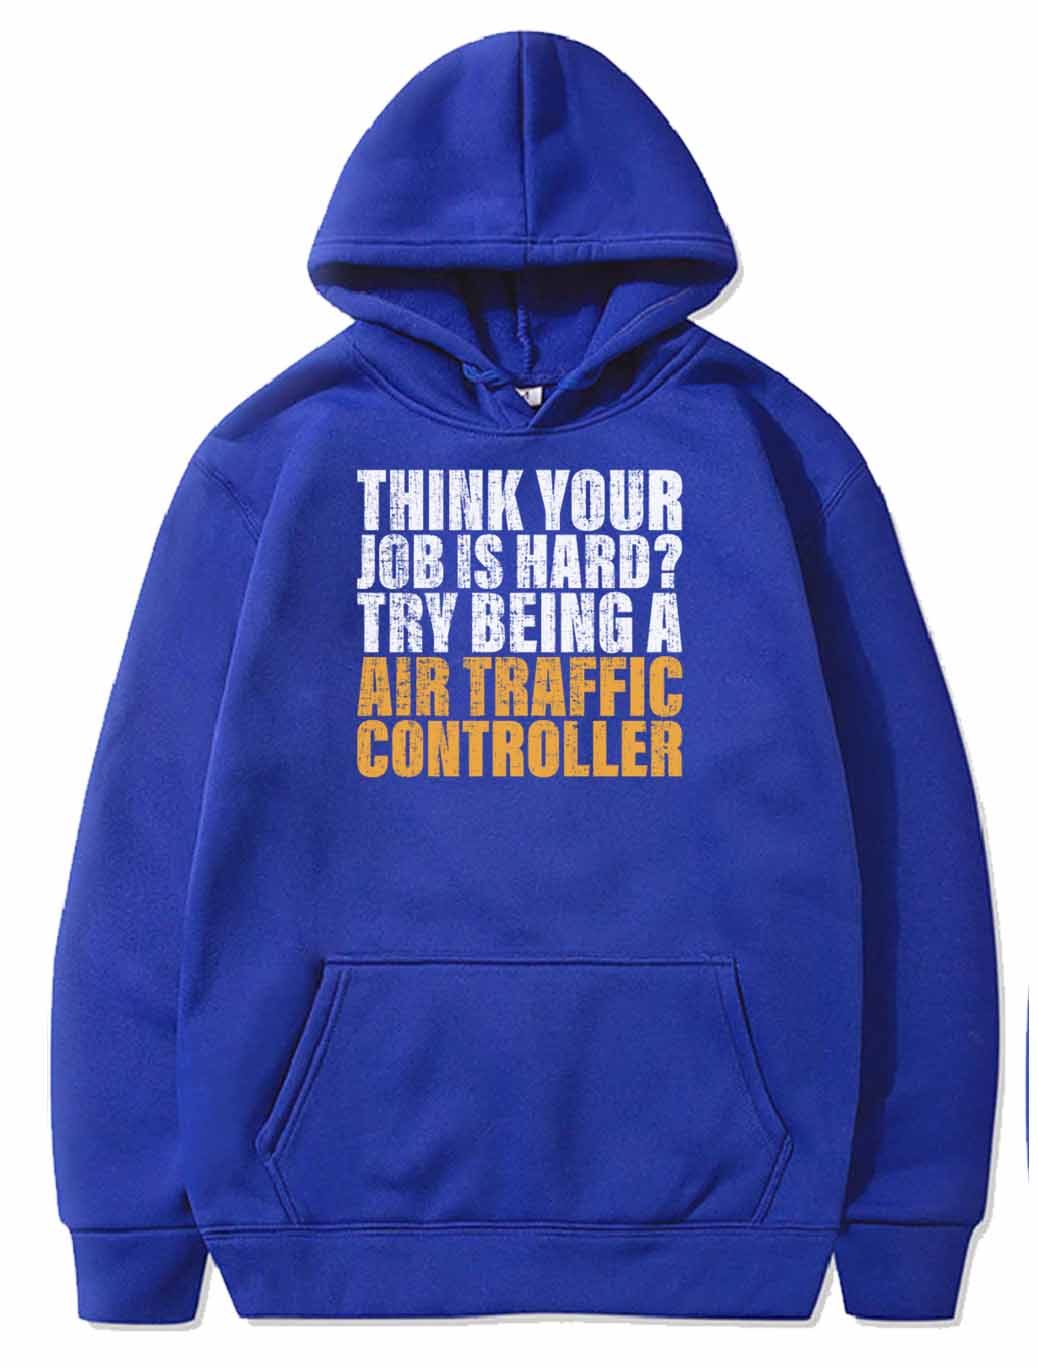 Try Being A Air Traffic Controller Design for ATC PULLOVER THE AV8R